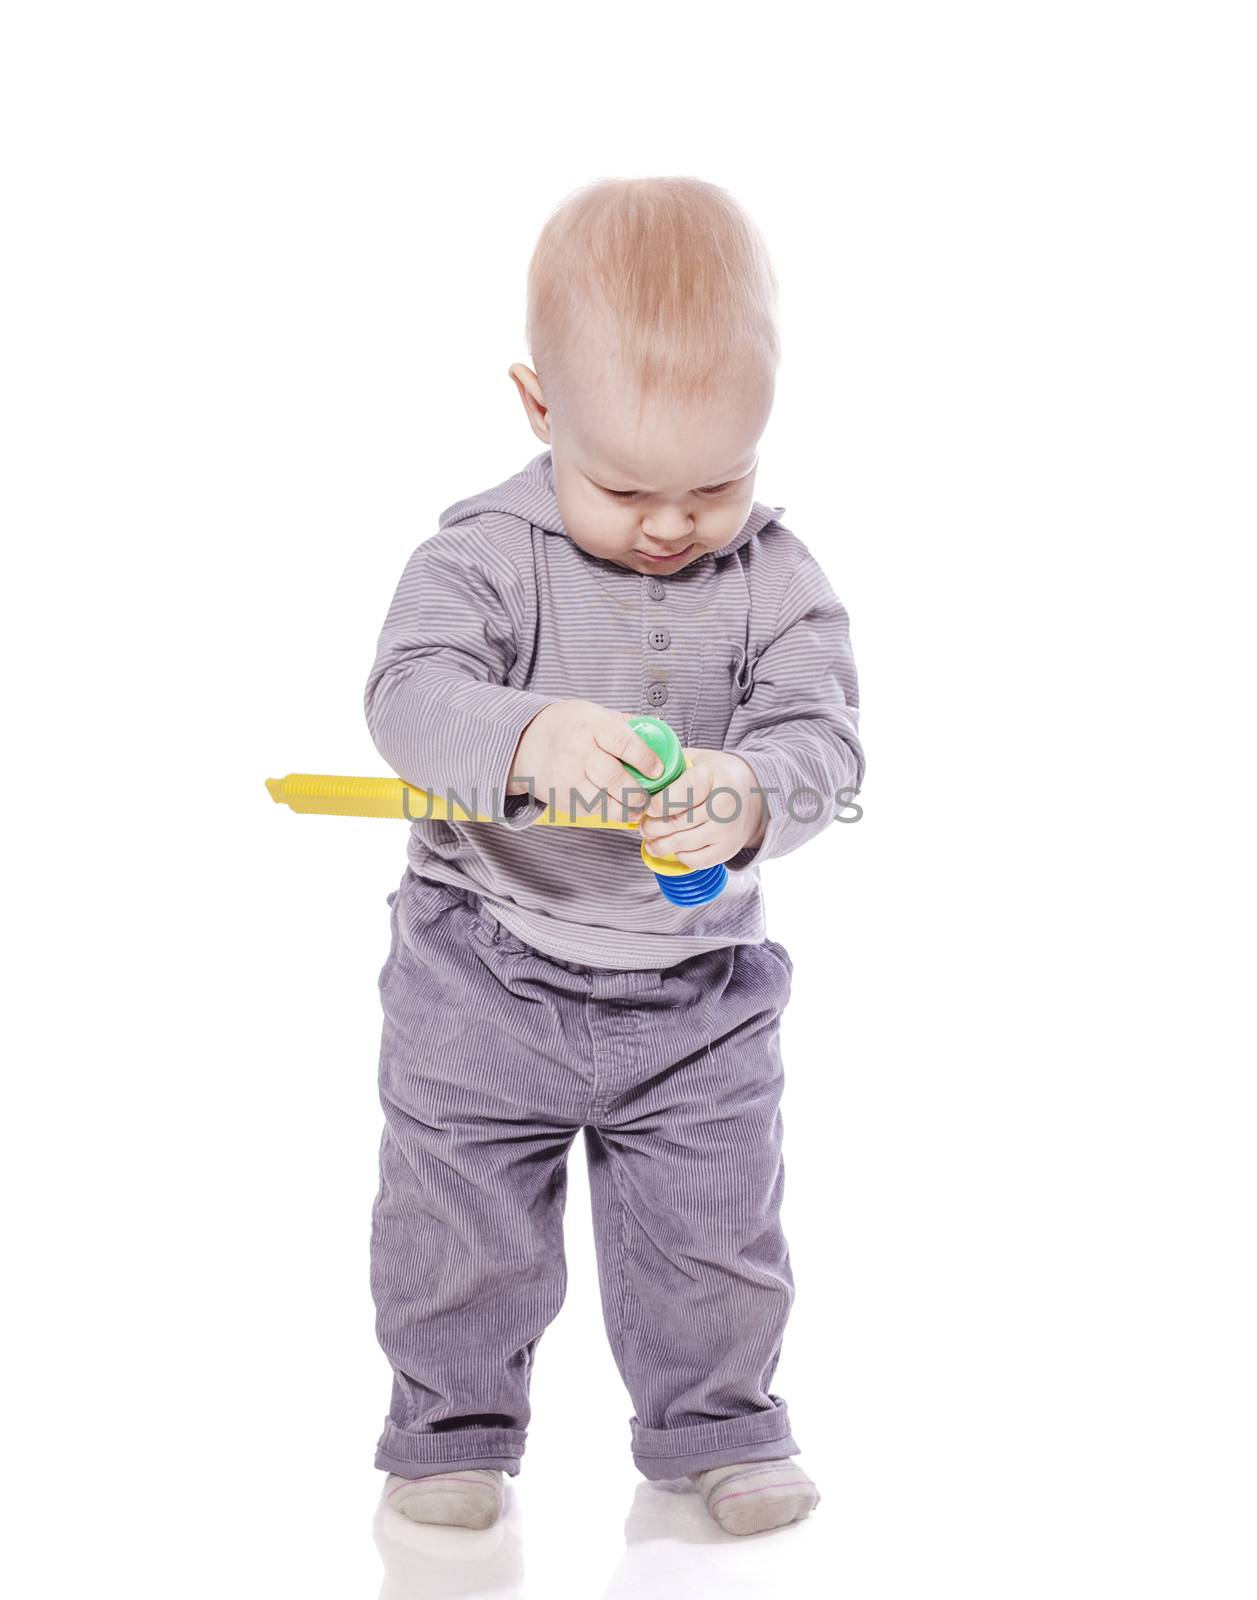 Toddler boy standing holding toy hummer isolated on white